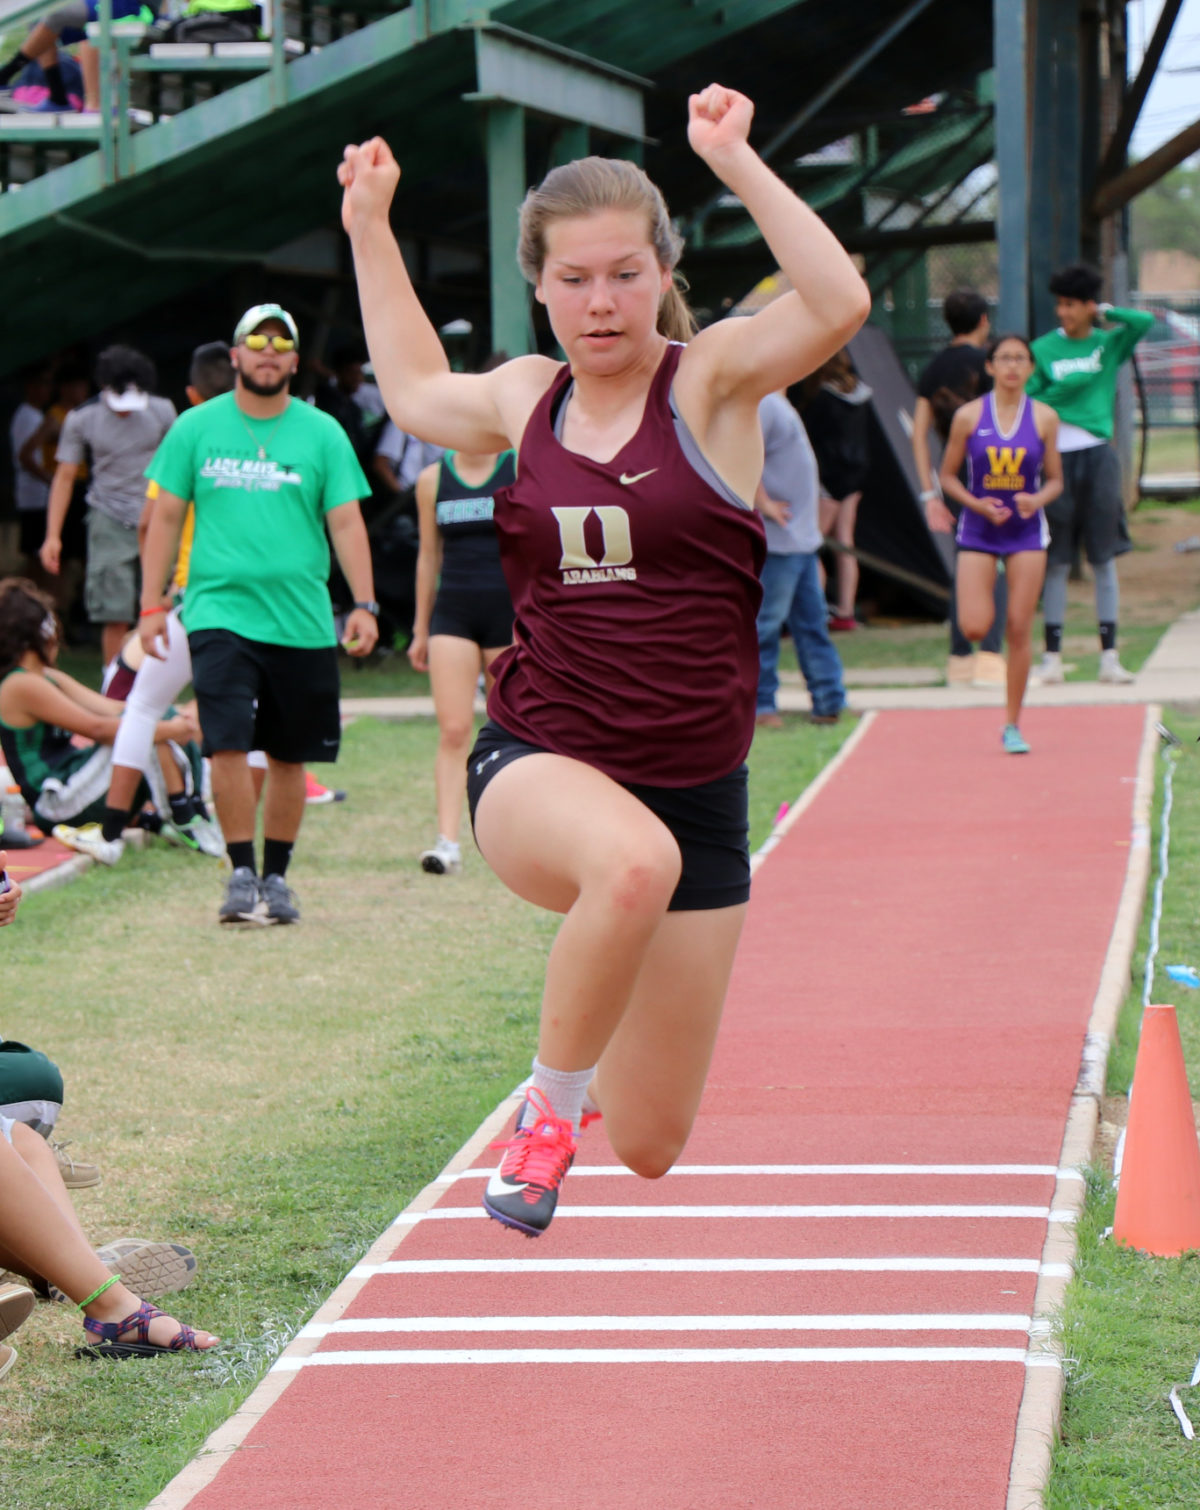 Arabian track clinches back-to-back championships